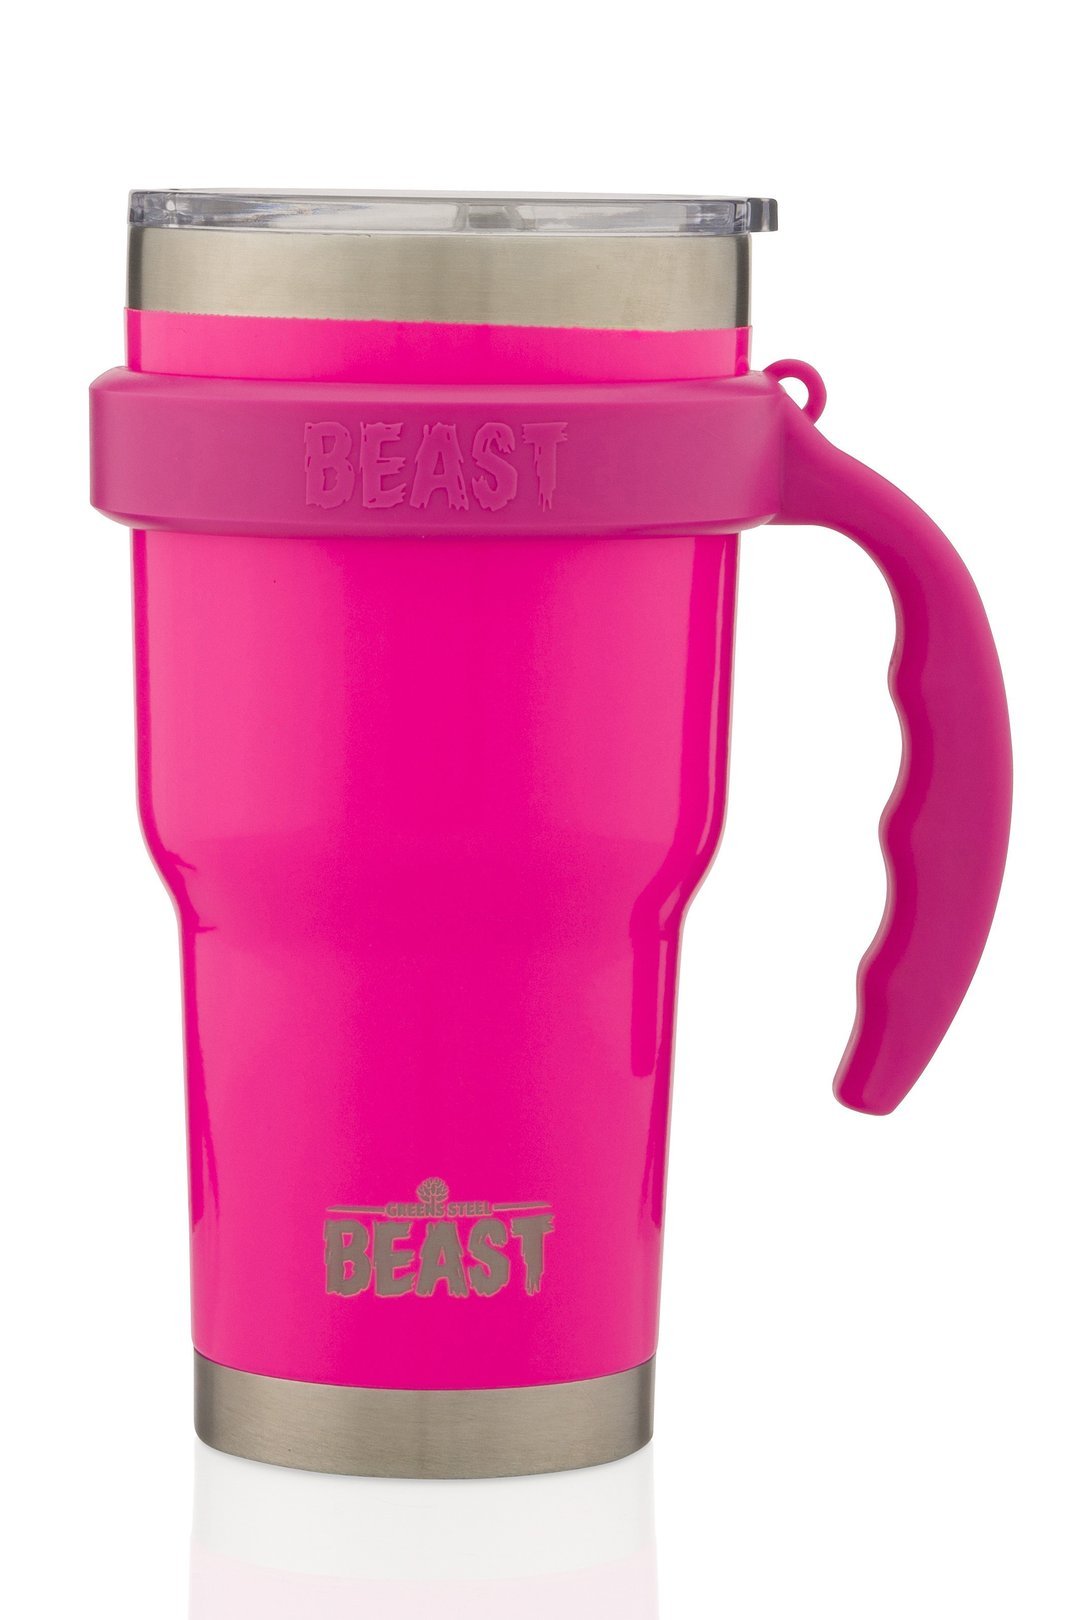 BEAST 30 oz Rainbow Tumbler Set with Handle - Stainless Steel Coffee Cup +  2 Straws Brush, Gift Box & Black Handle